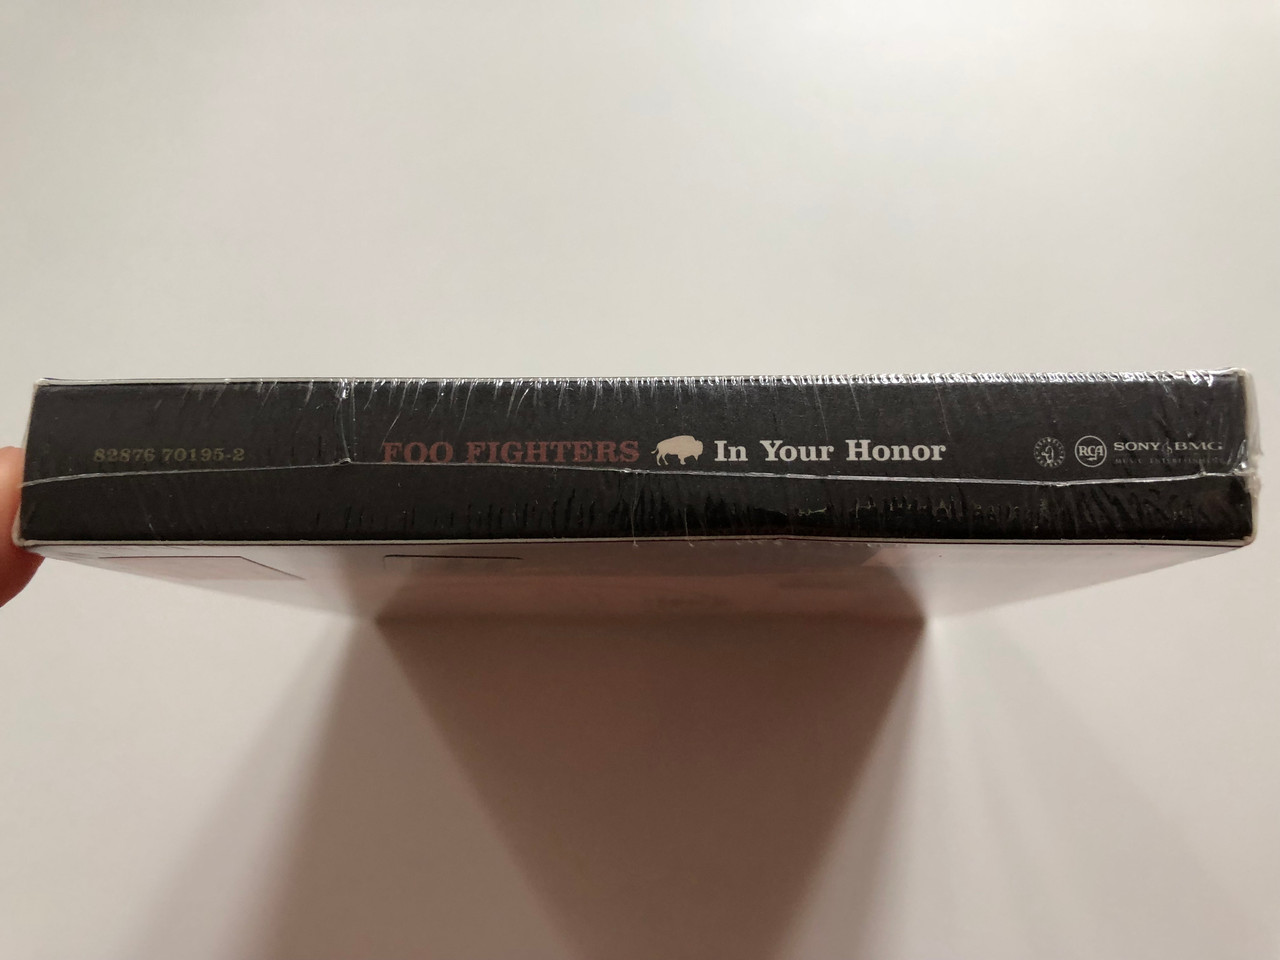 https://cdn10.bigcommerce.com/s-62bdpkt7pb/products/0/images/207600/Foo_Fighters_In_Your_Honor_20_songs_on_2_CDs._One_loud._One_not_so_loud._Includes_Best_Of_You_DOA_Resolve_Miracle._DVD_Includes_Entire_Album_in_Enhanced_Stereo_Disc_2_RCA_2x_Audio_3__22212.1642408048.1280.1280.JPG?c=2&_gl=1*1nhj1bg*_ga*MjA2NTIxMjE2MC4xNTkwNTEyNTMy*_ga_WS2VZYPC6G*MTY0MjQwMzU5OS4yNjQuMS4xNjQyNDA4MDI2LjYw